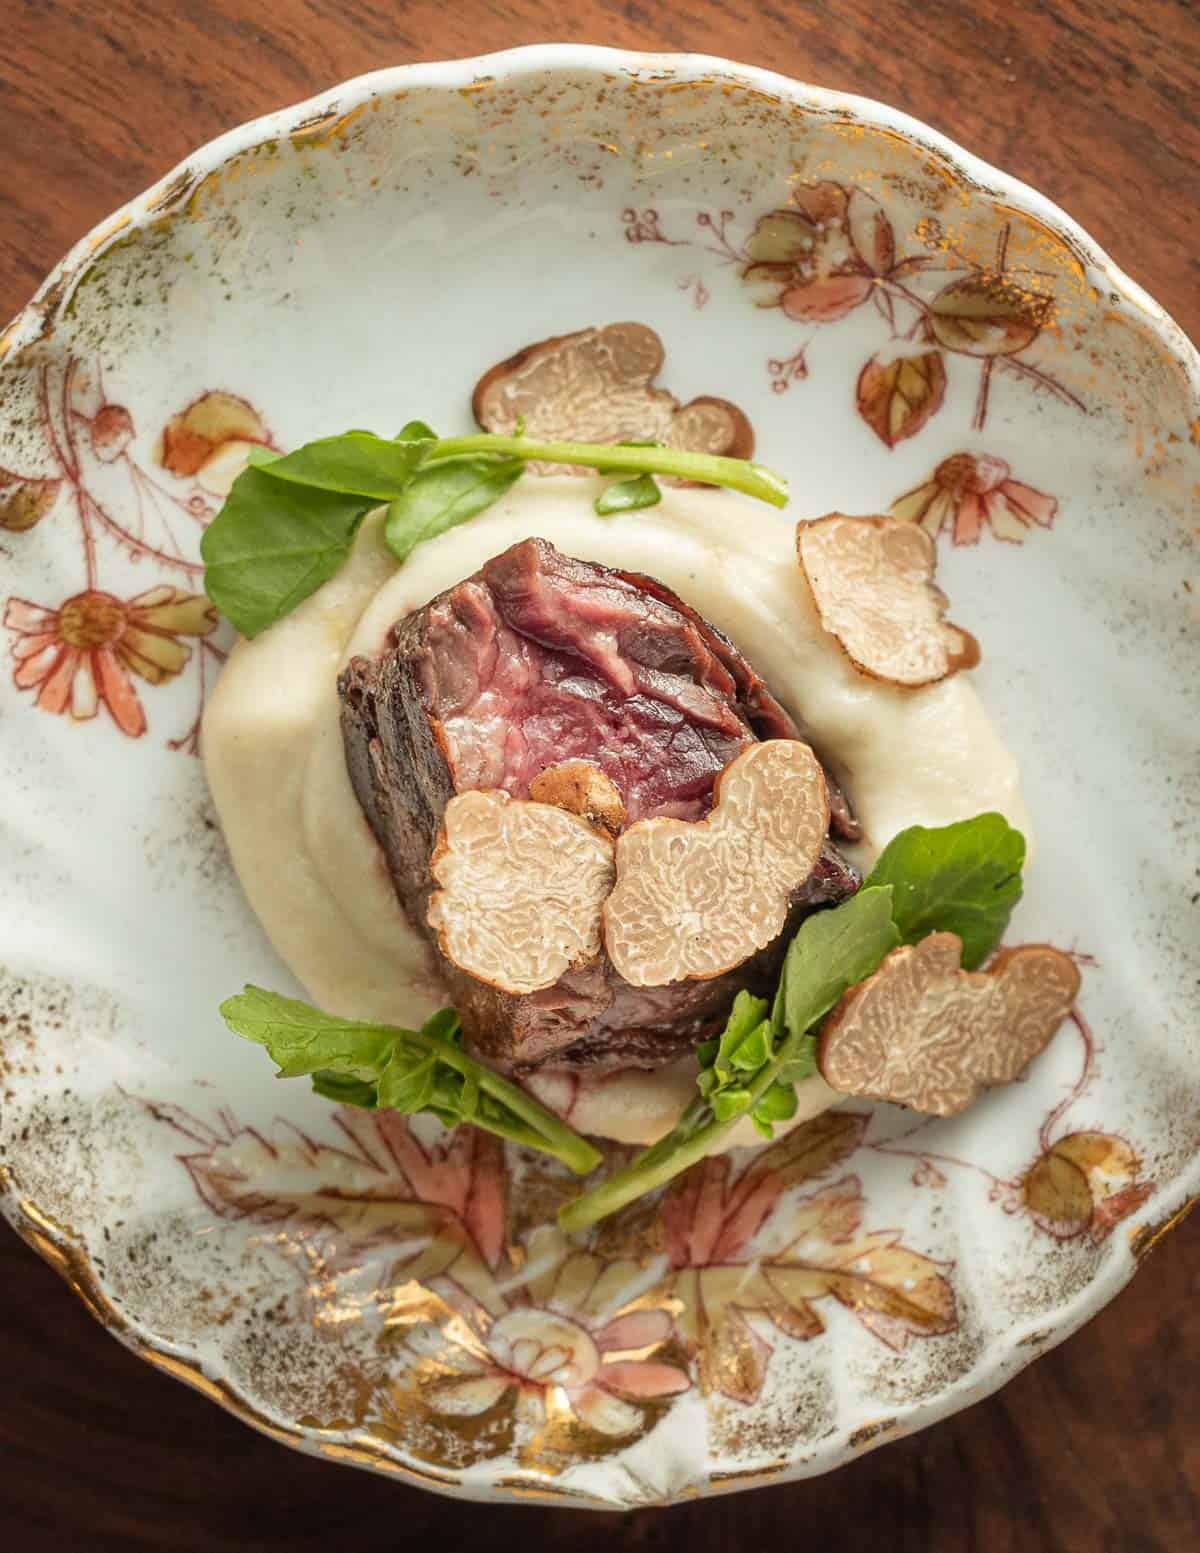 A cooked piece of hanger steak on a China plate next to sunchoke puree, watercress, and fresh sliced pecan truffles.